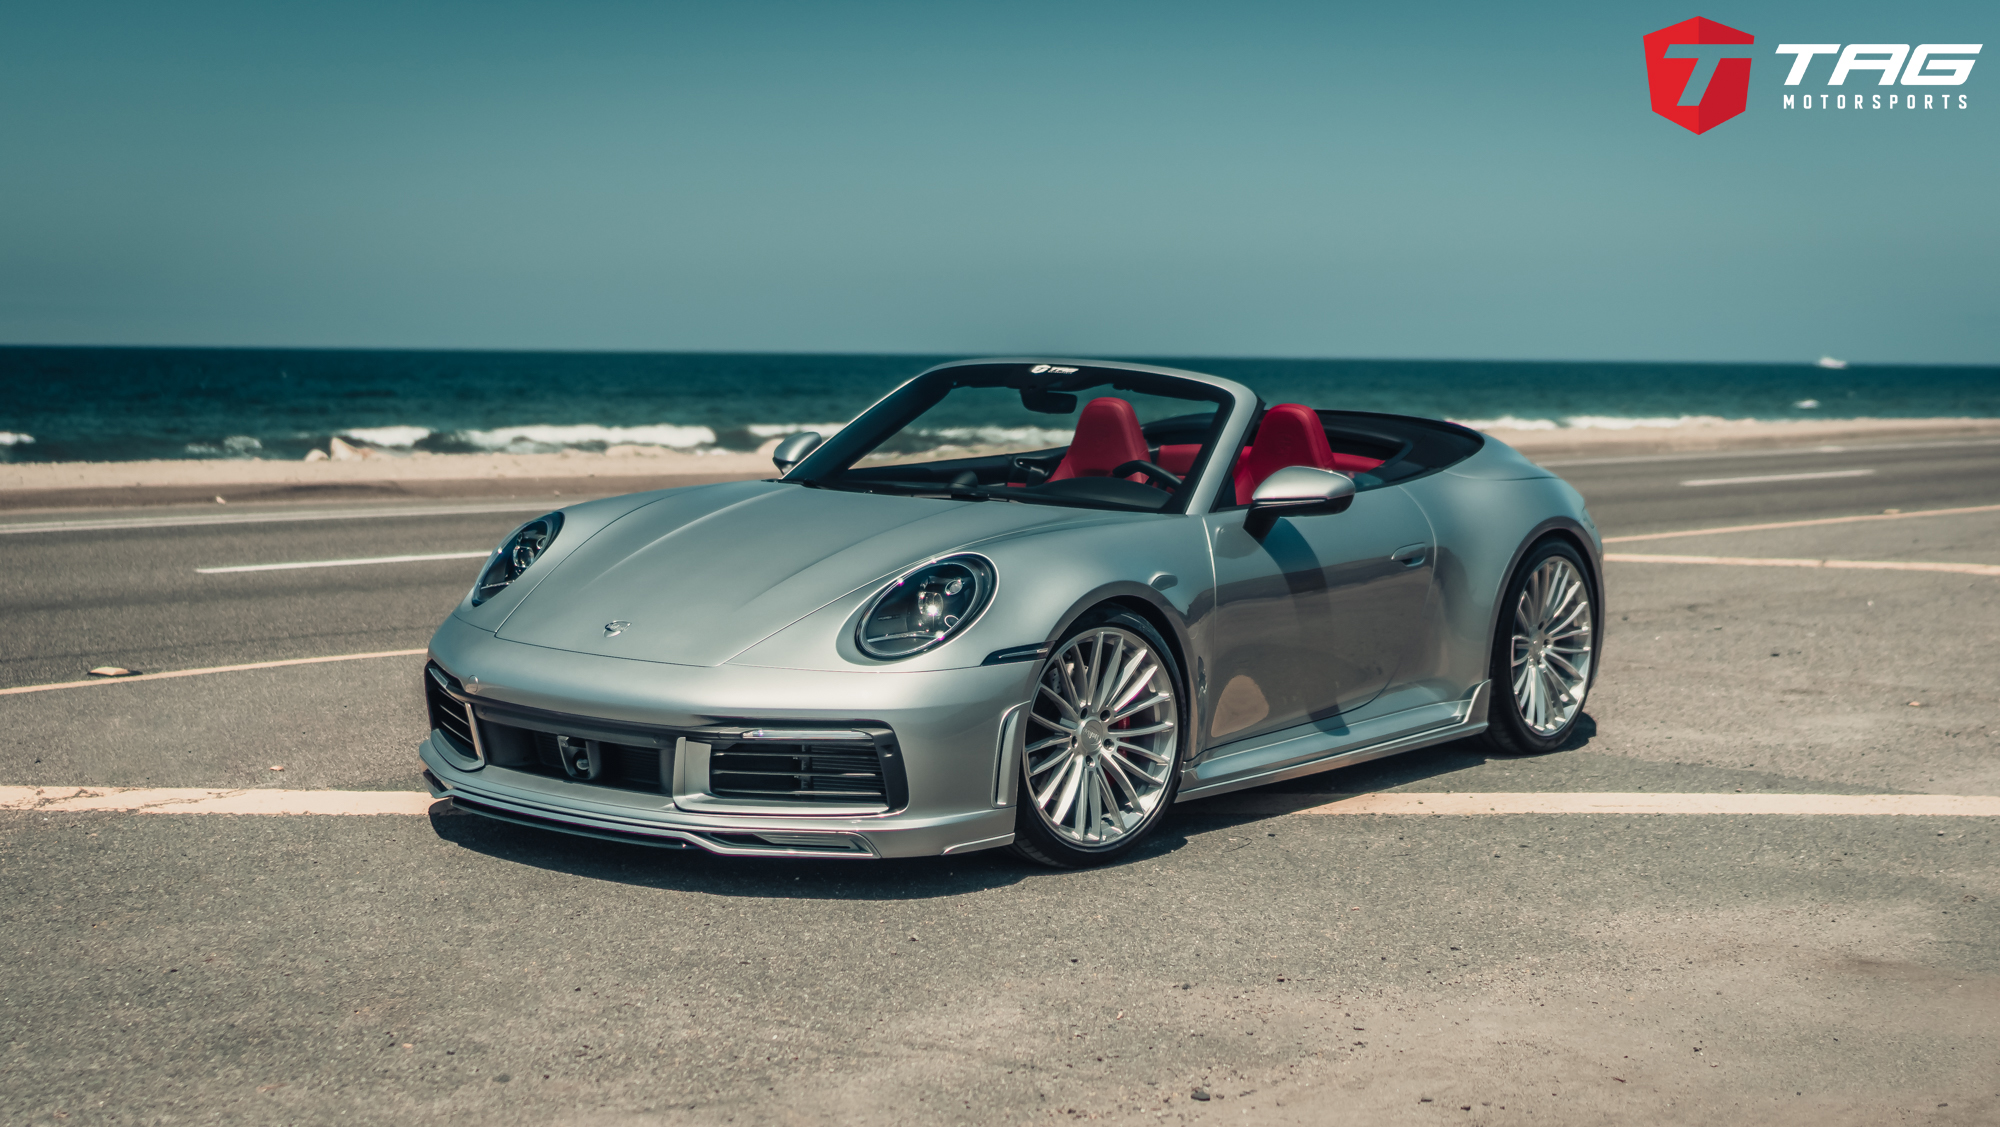 The TechArt 992 Project by TAG Motorsports